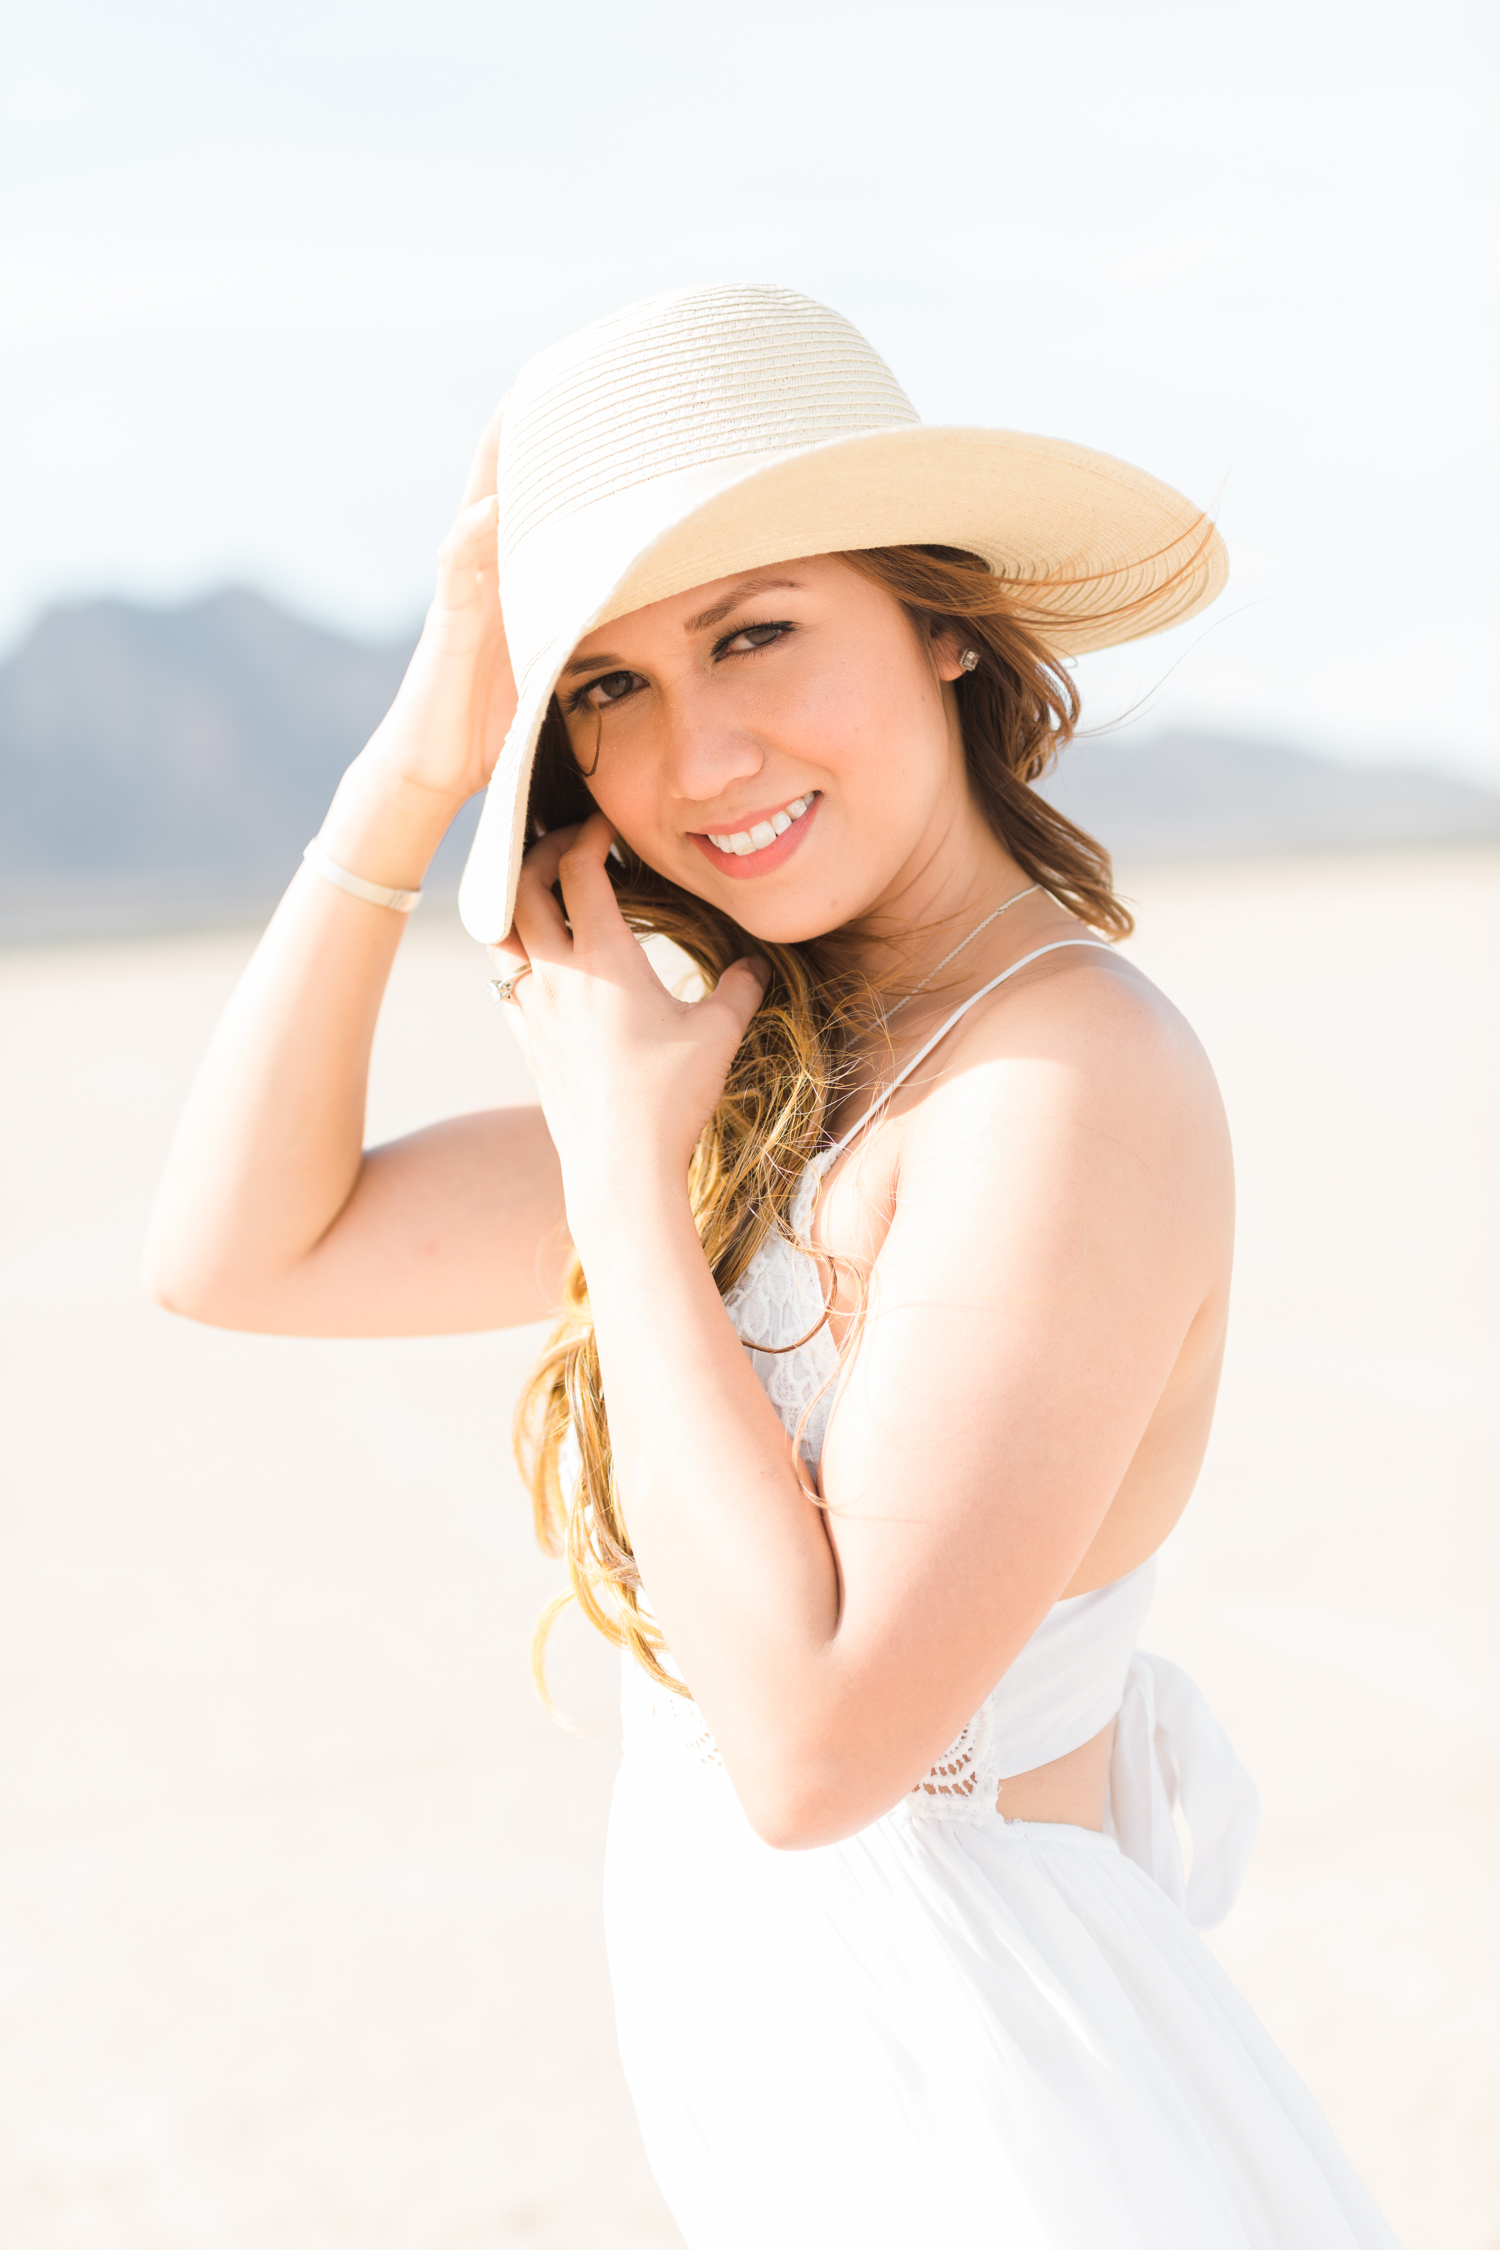 Girl on a white dress holds onto her hat as she smiles